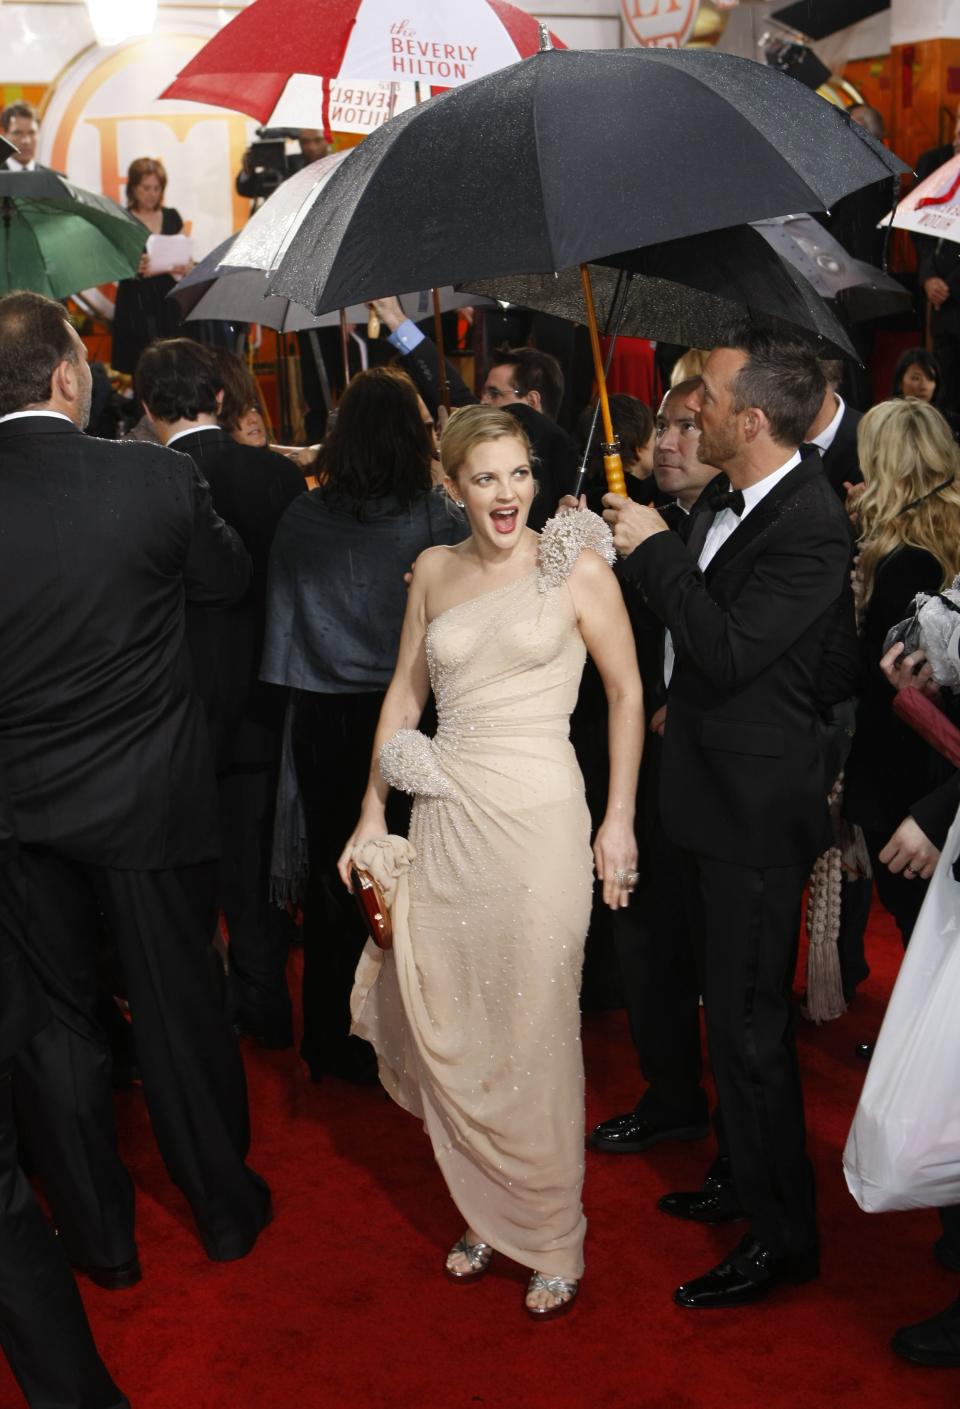 Drew Barrymore, who won her first Golden Globe at the 2010 awards for her role in <em>Grey Gardens</em>, posed pre-show in a sea of umbrellas. 